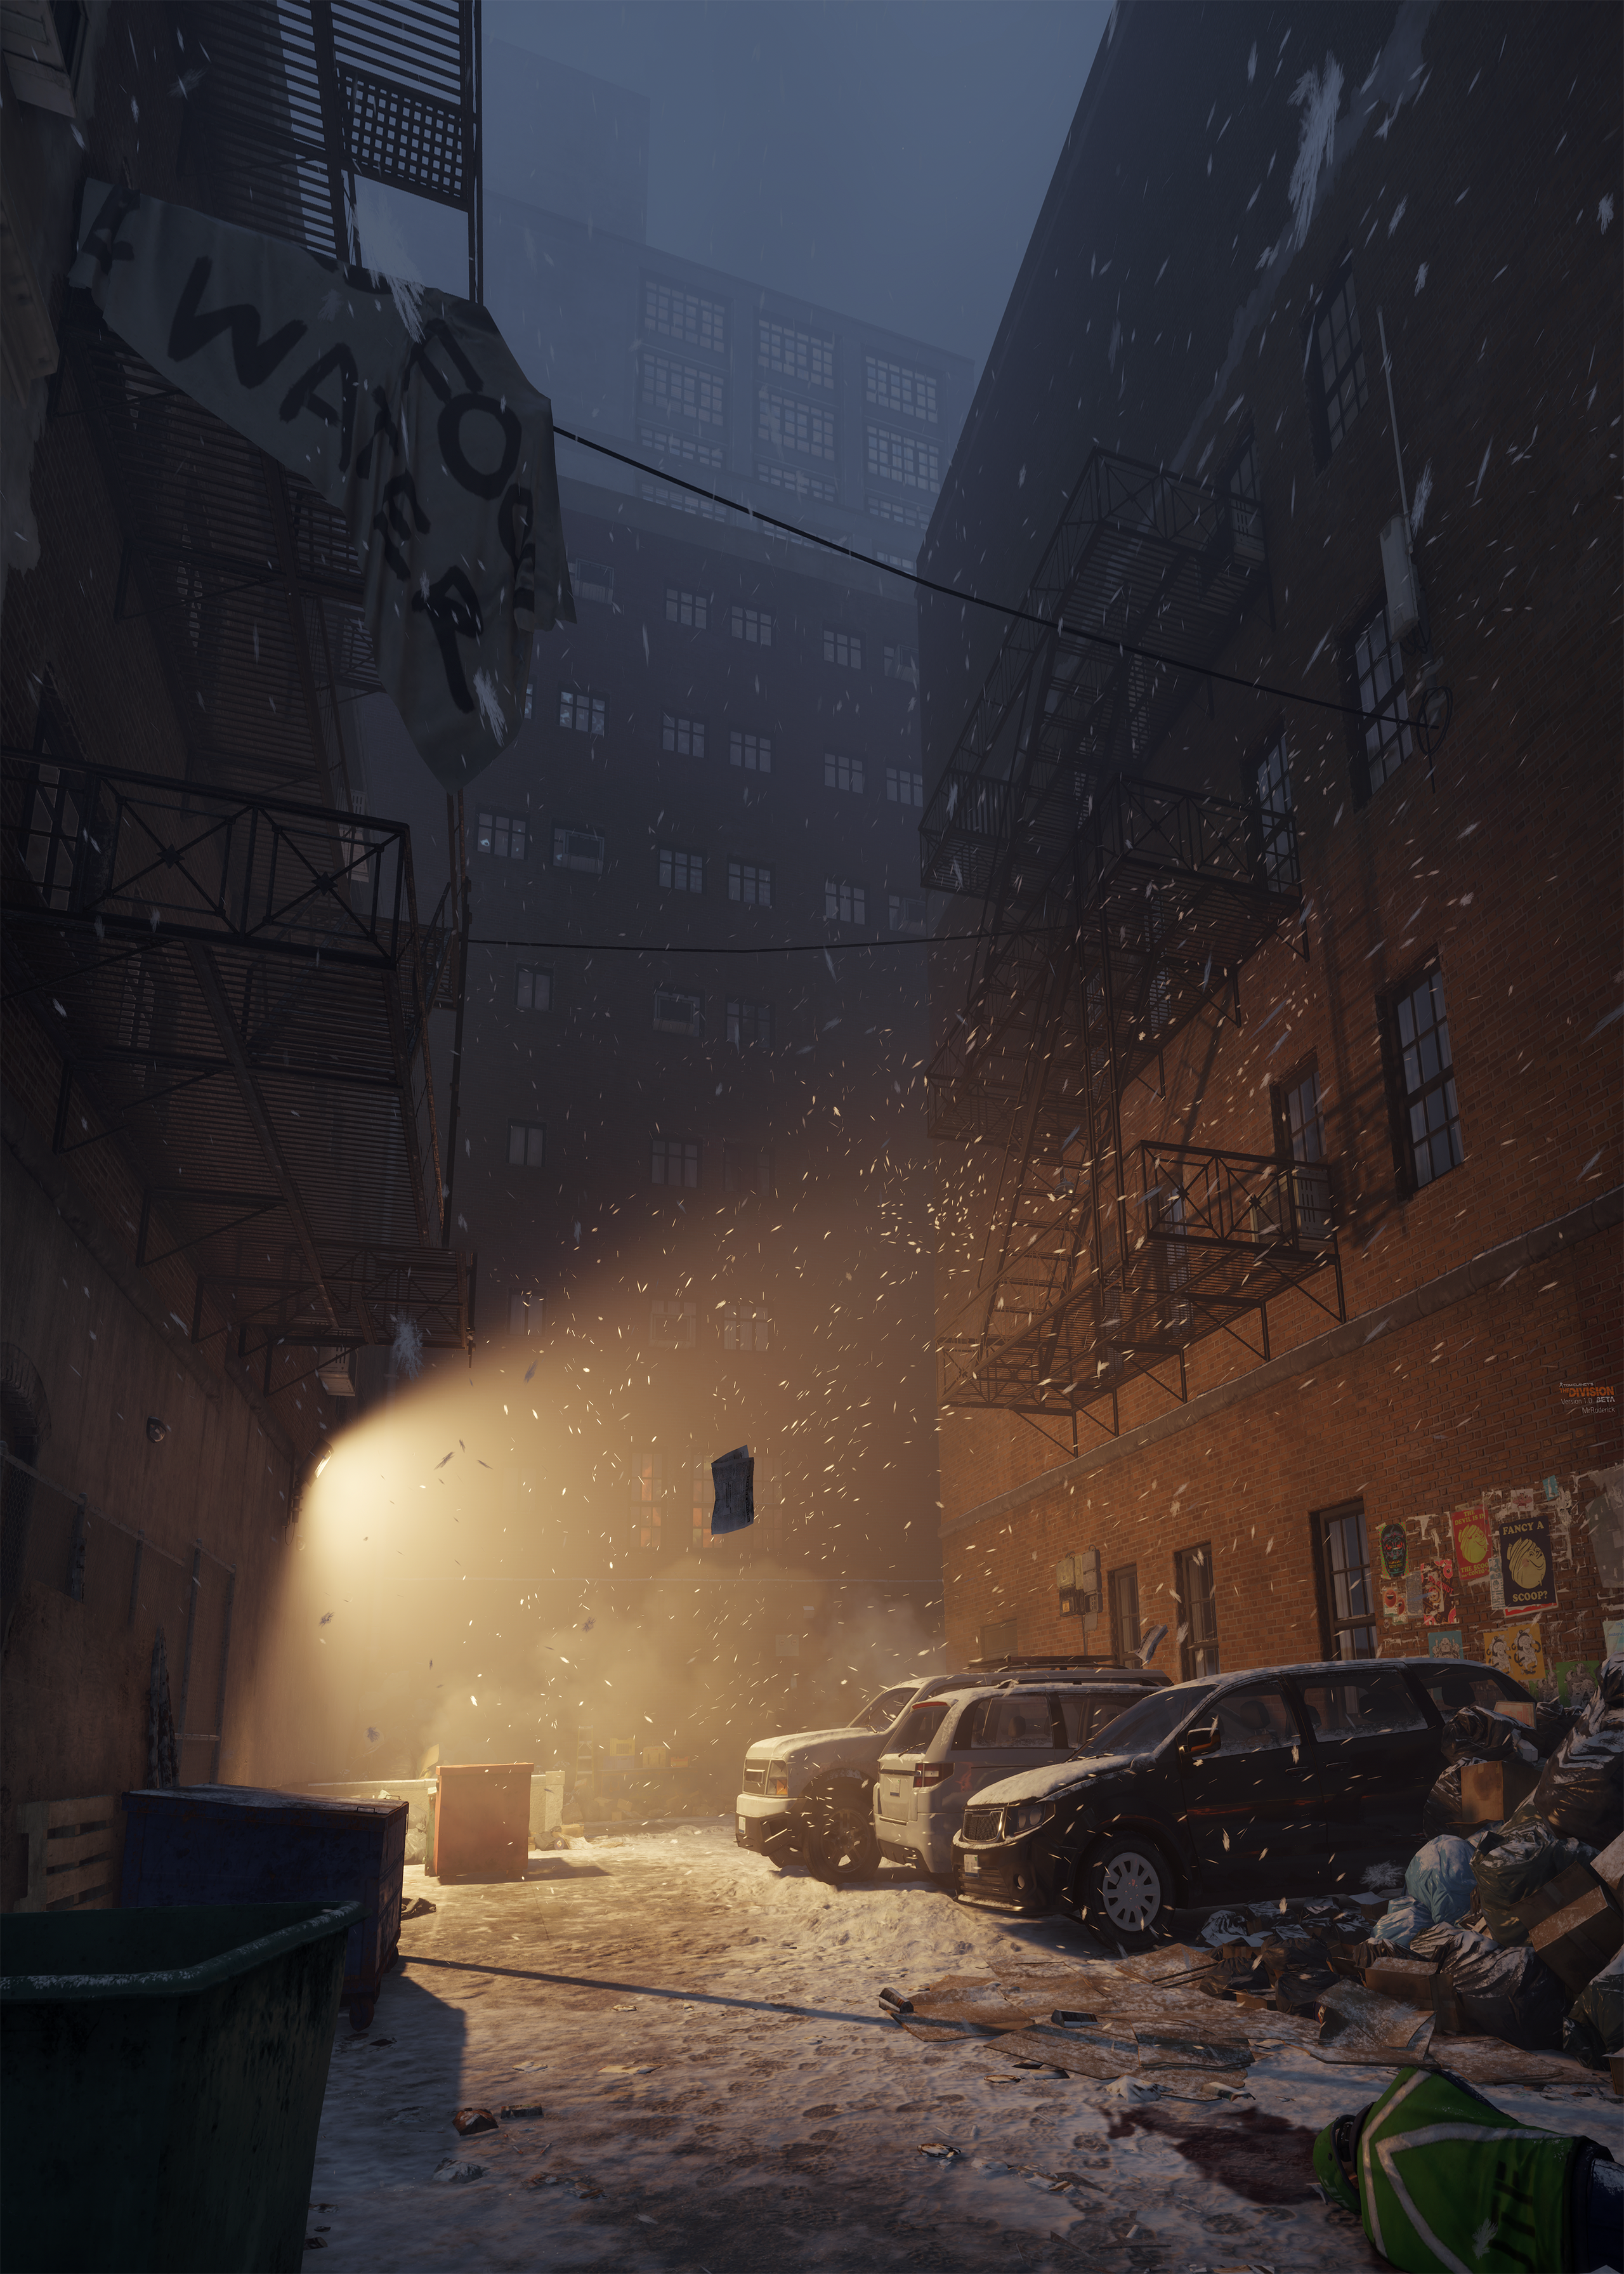 thedivision_pano_2_by_roderickartist-d9p